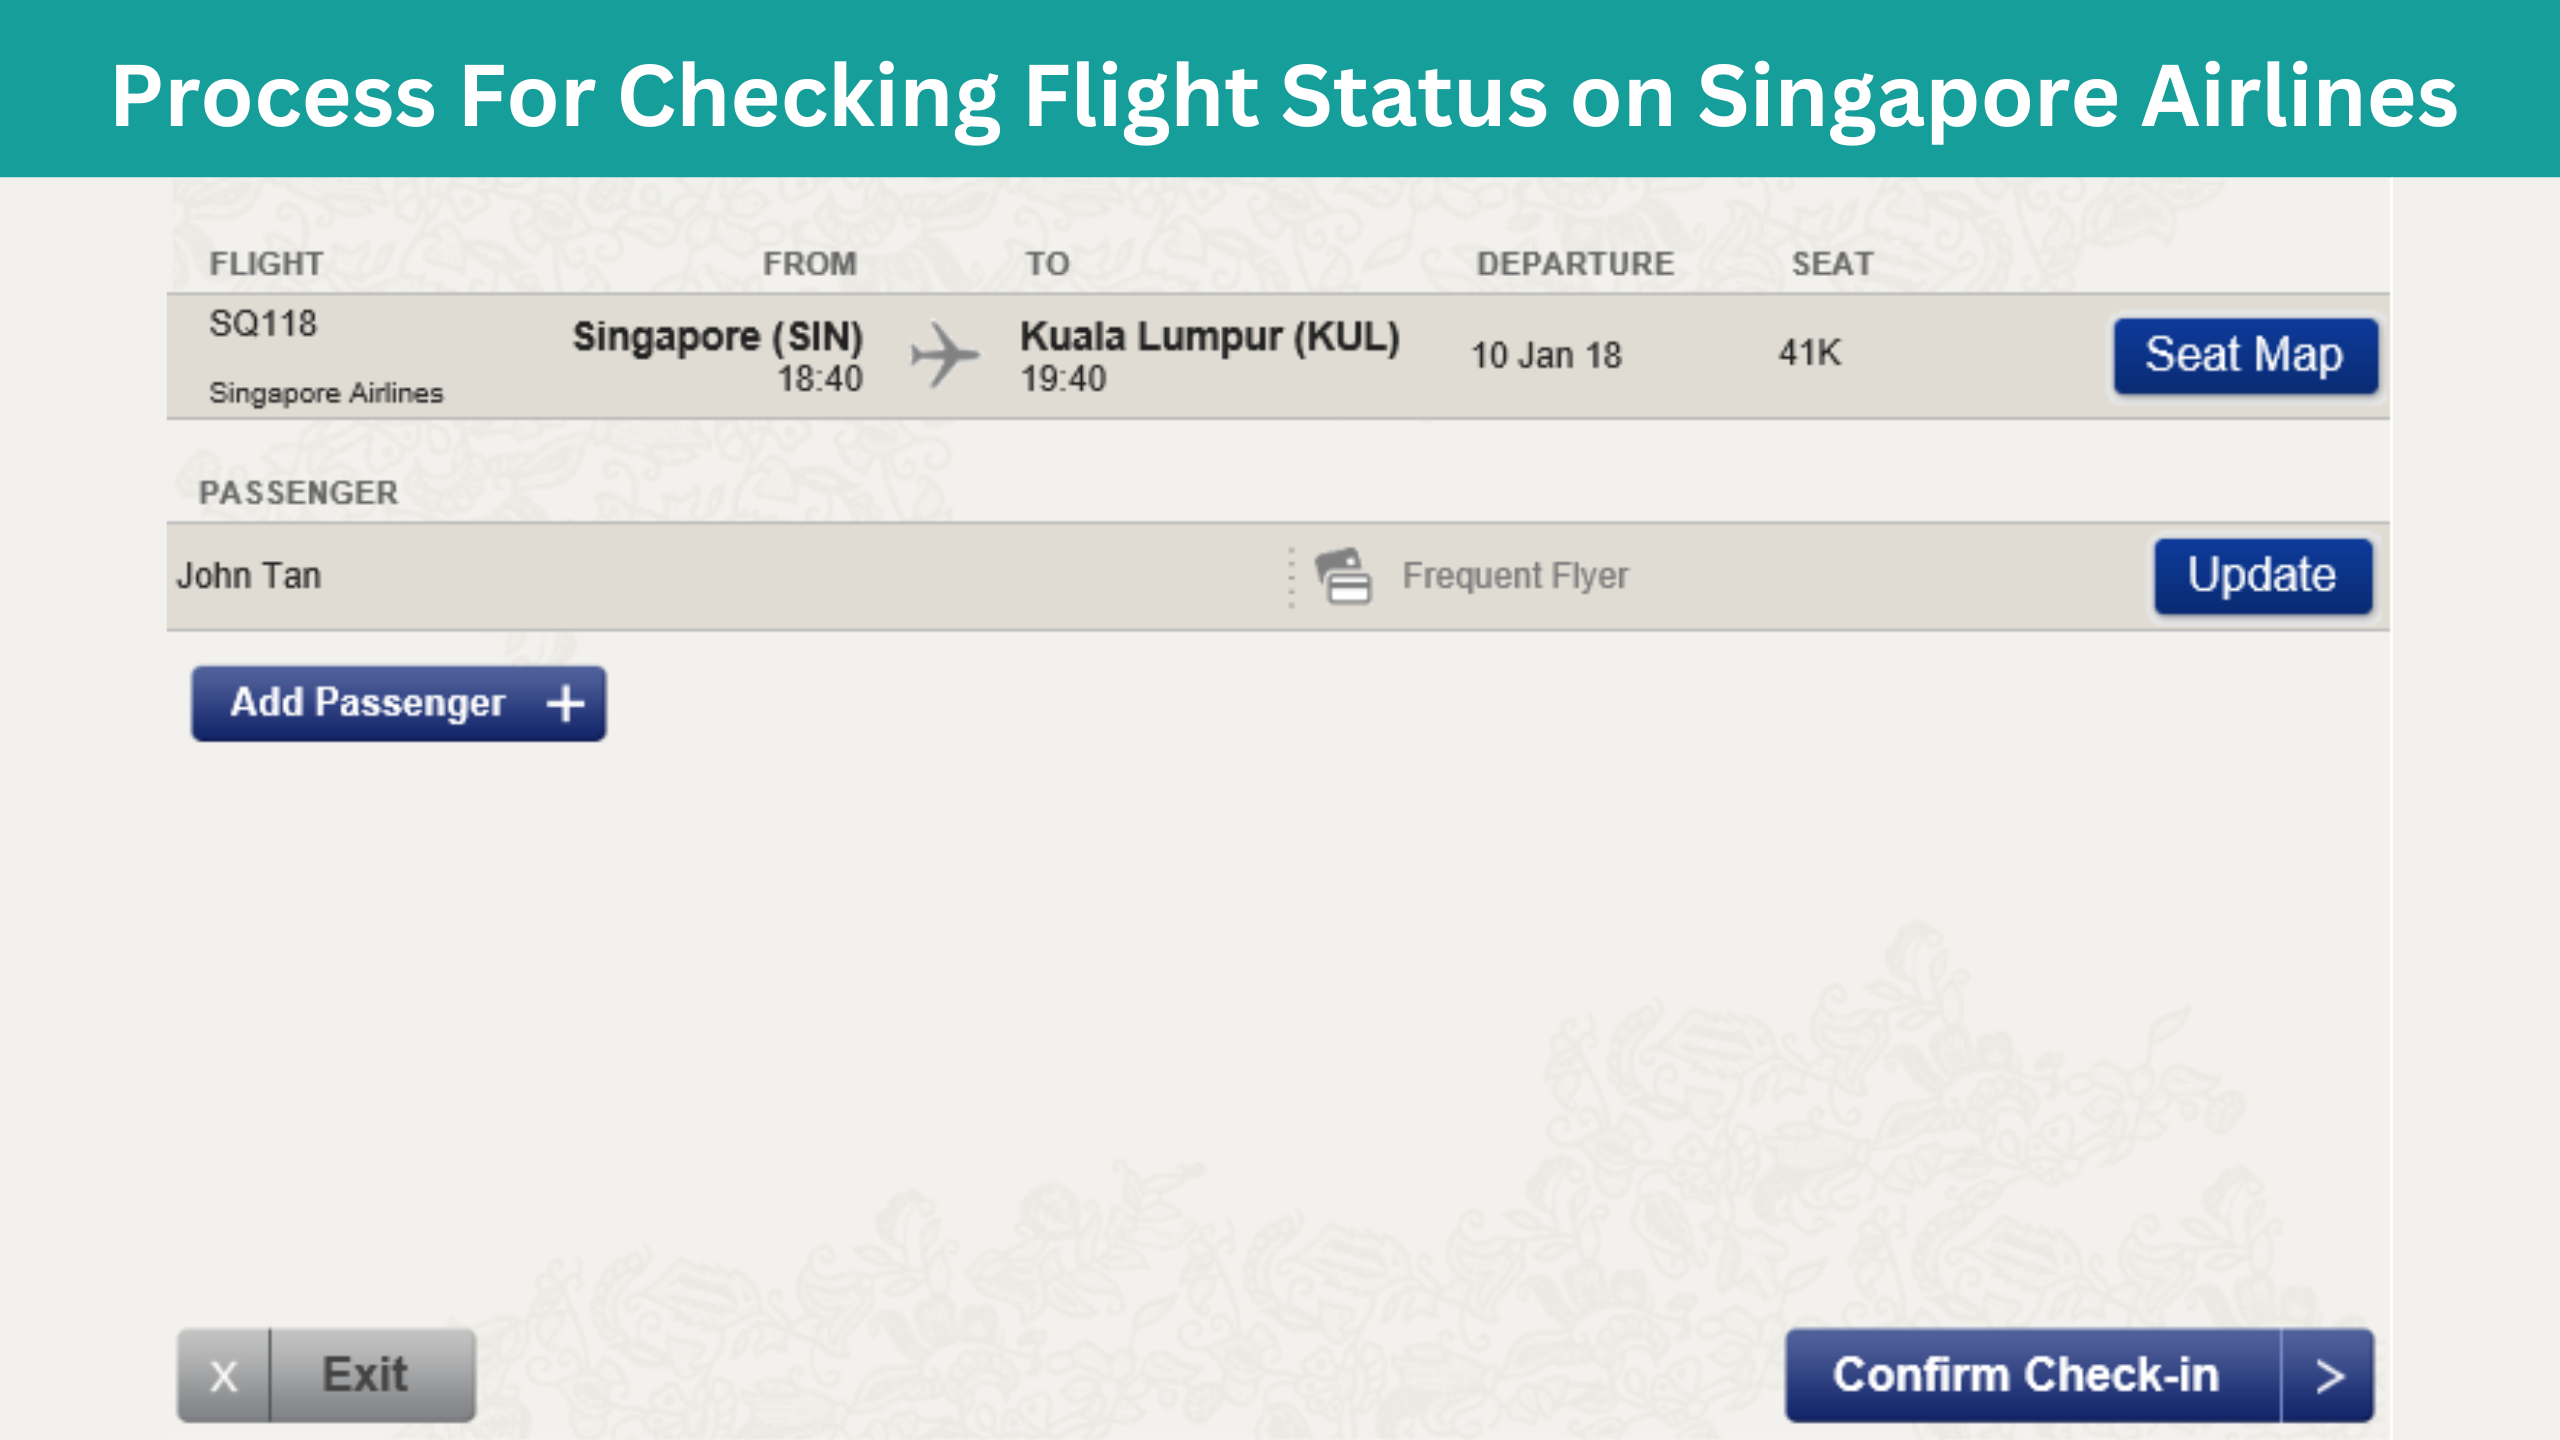 The Process For Checking Your Flight Status on Singapore Airlines